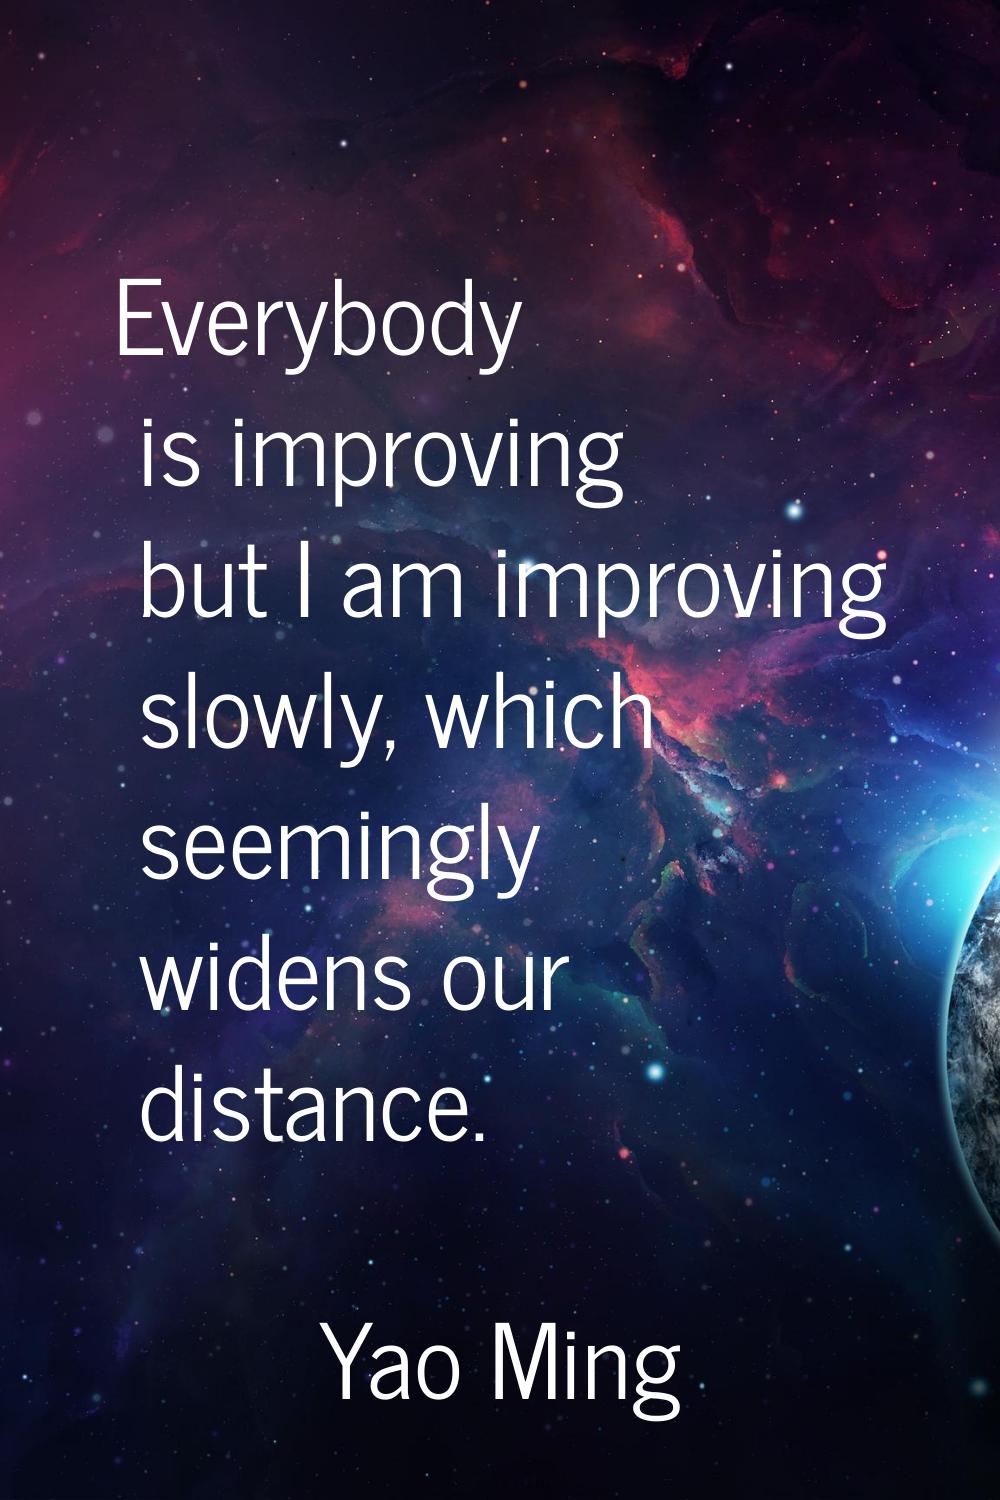 Everybody is improving but I am improving slowly, which seemingly widens our distance.